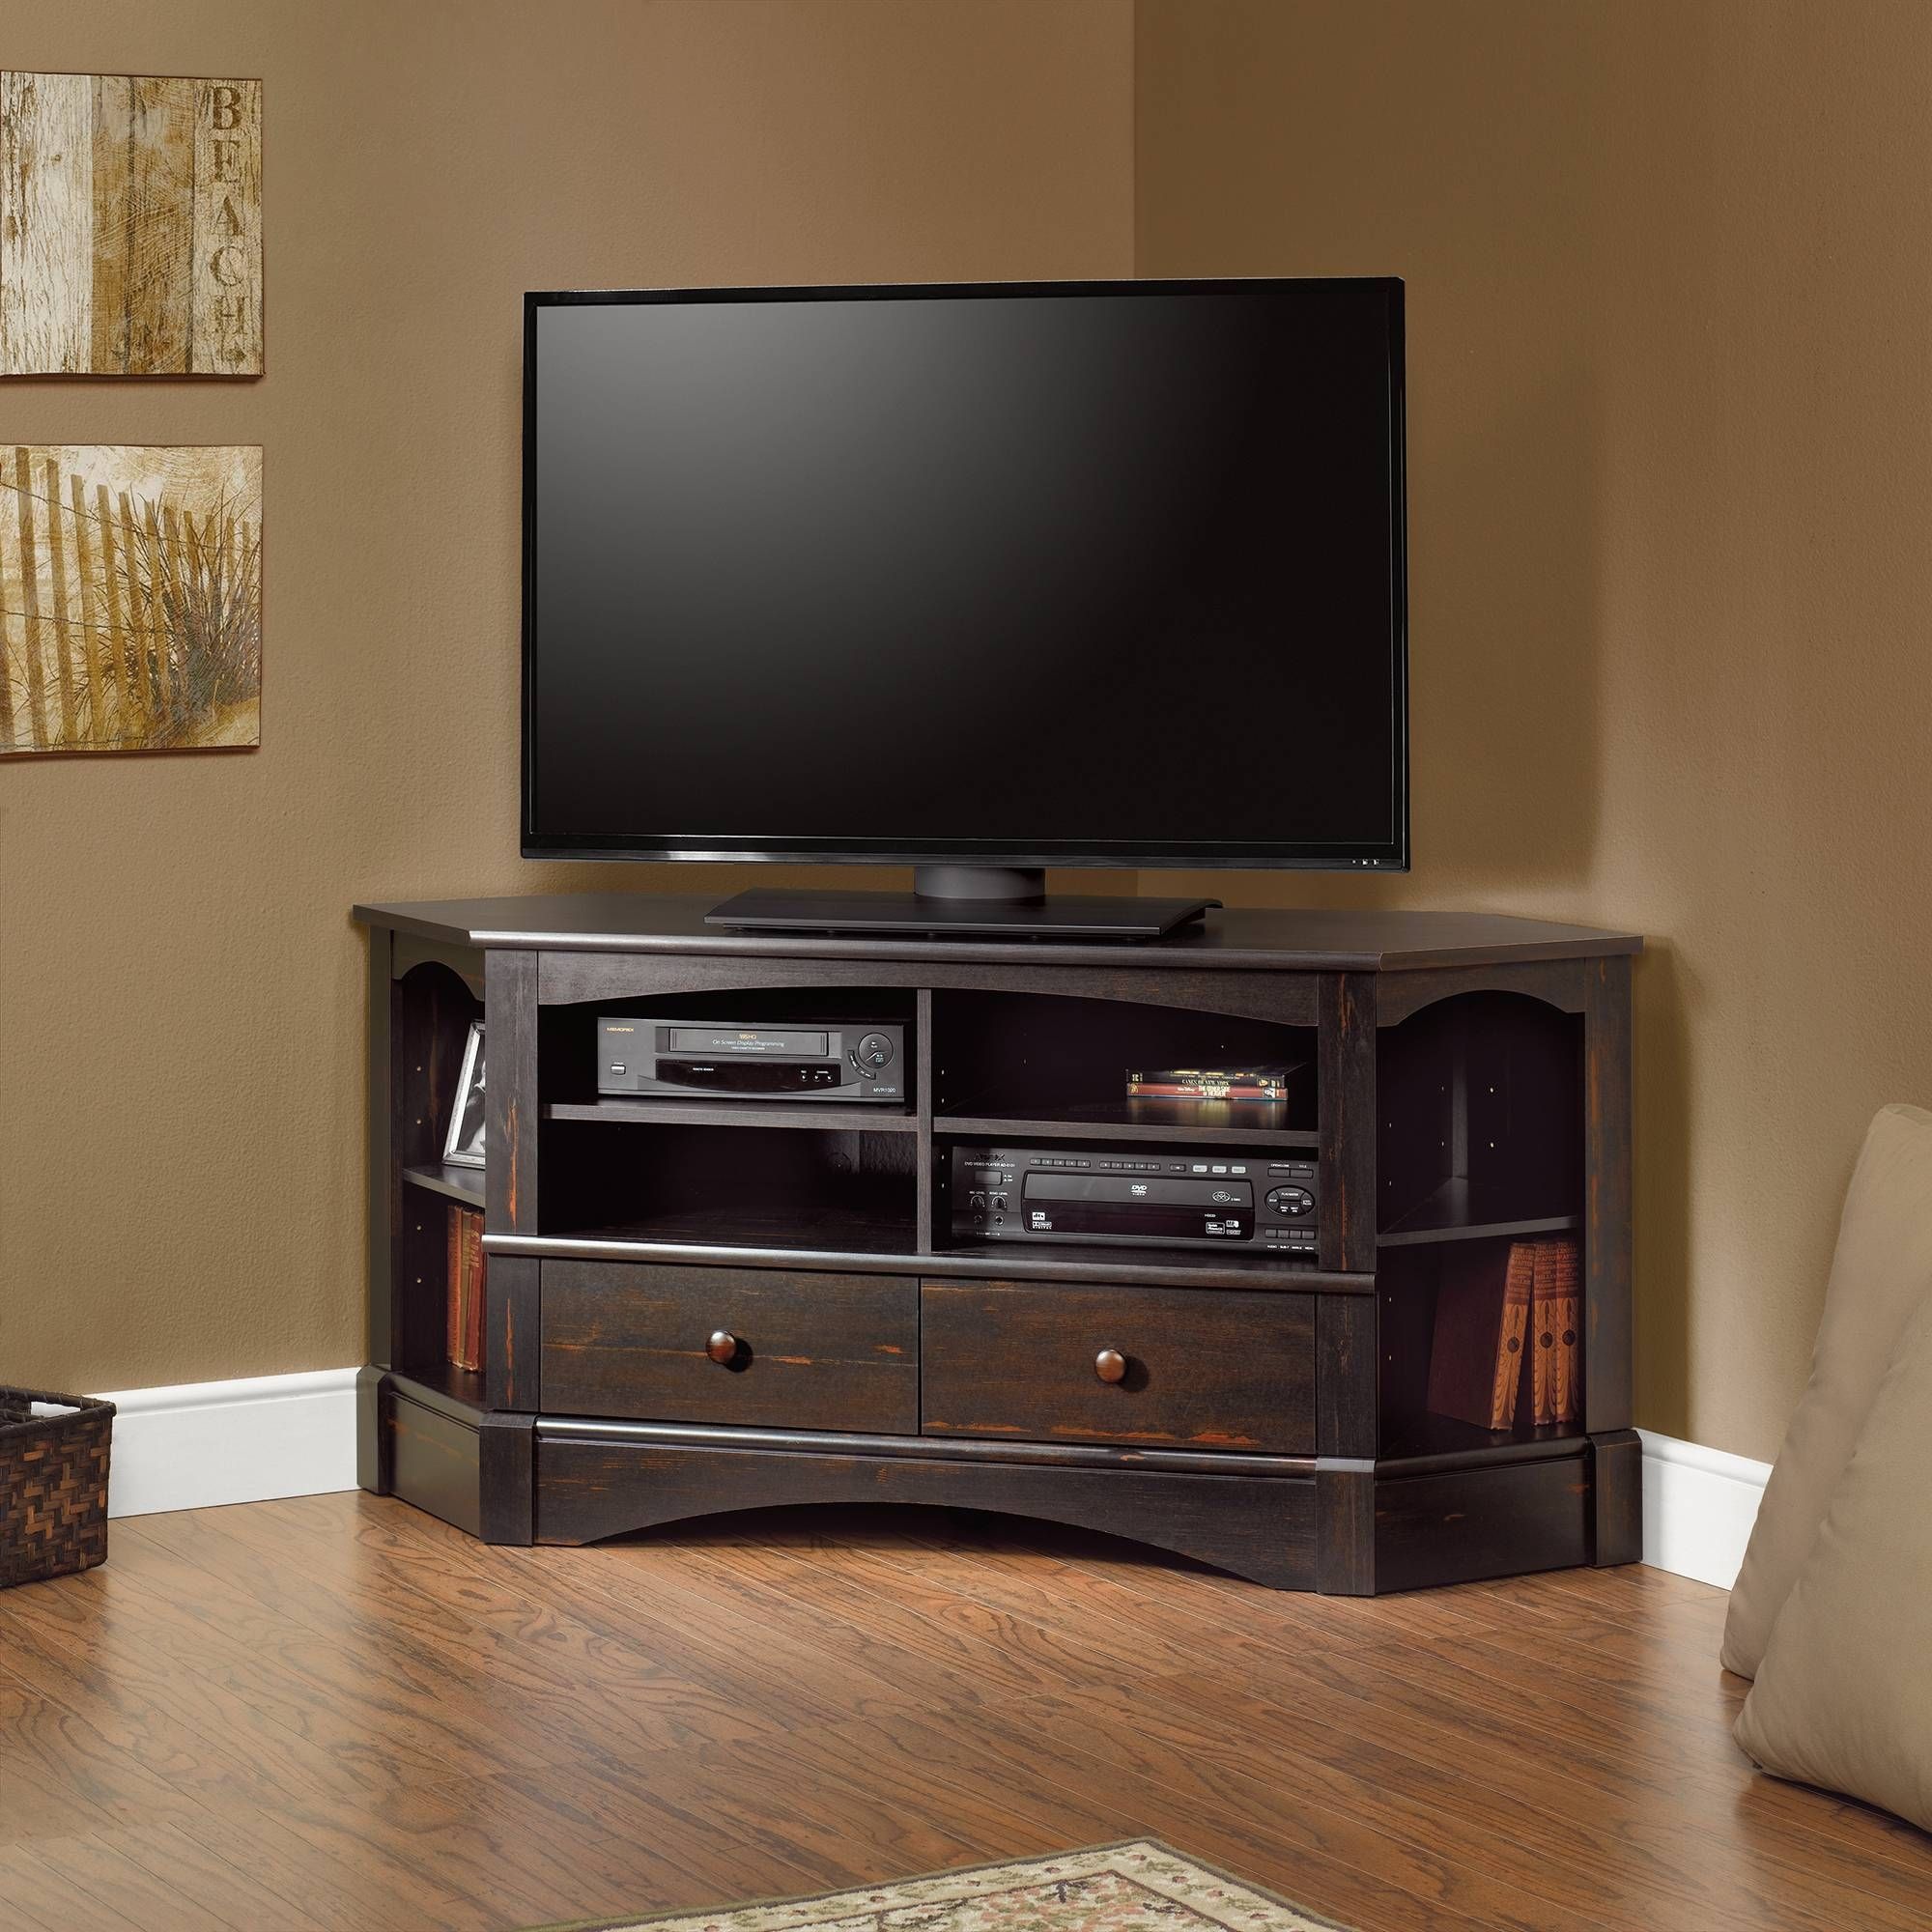 Harbor View | Corner Entertainment Credenza | 402902 | Sauder For Wood Corner Tv Cabinets (View 11 of 15)